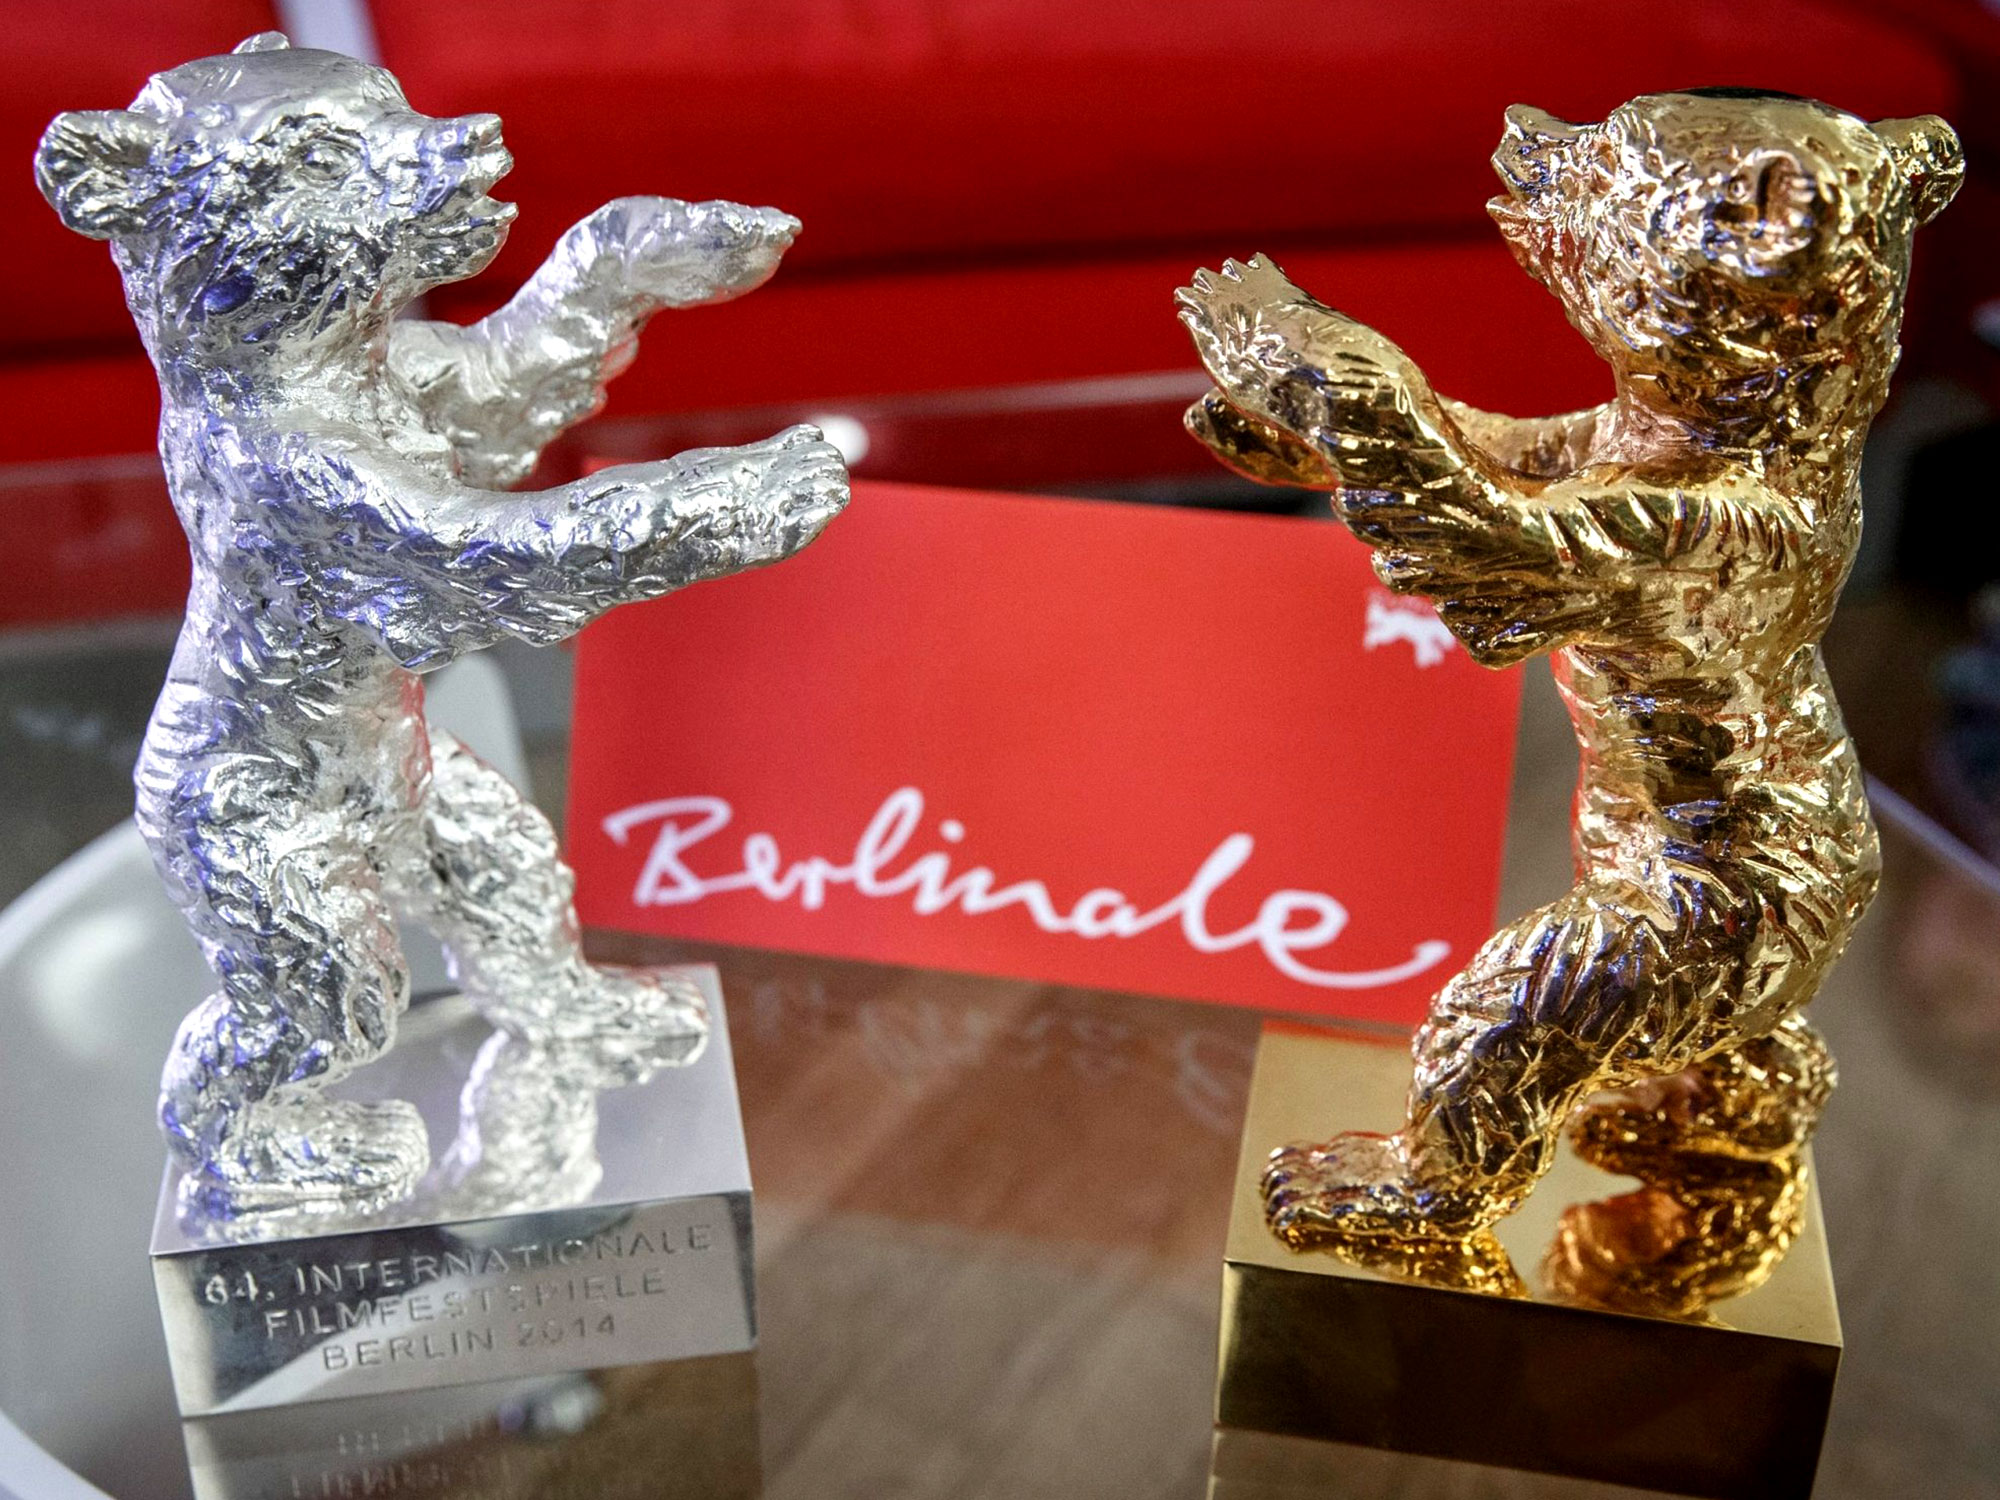 Berlinale Silver and Golden bear awards